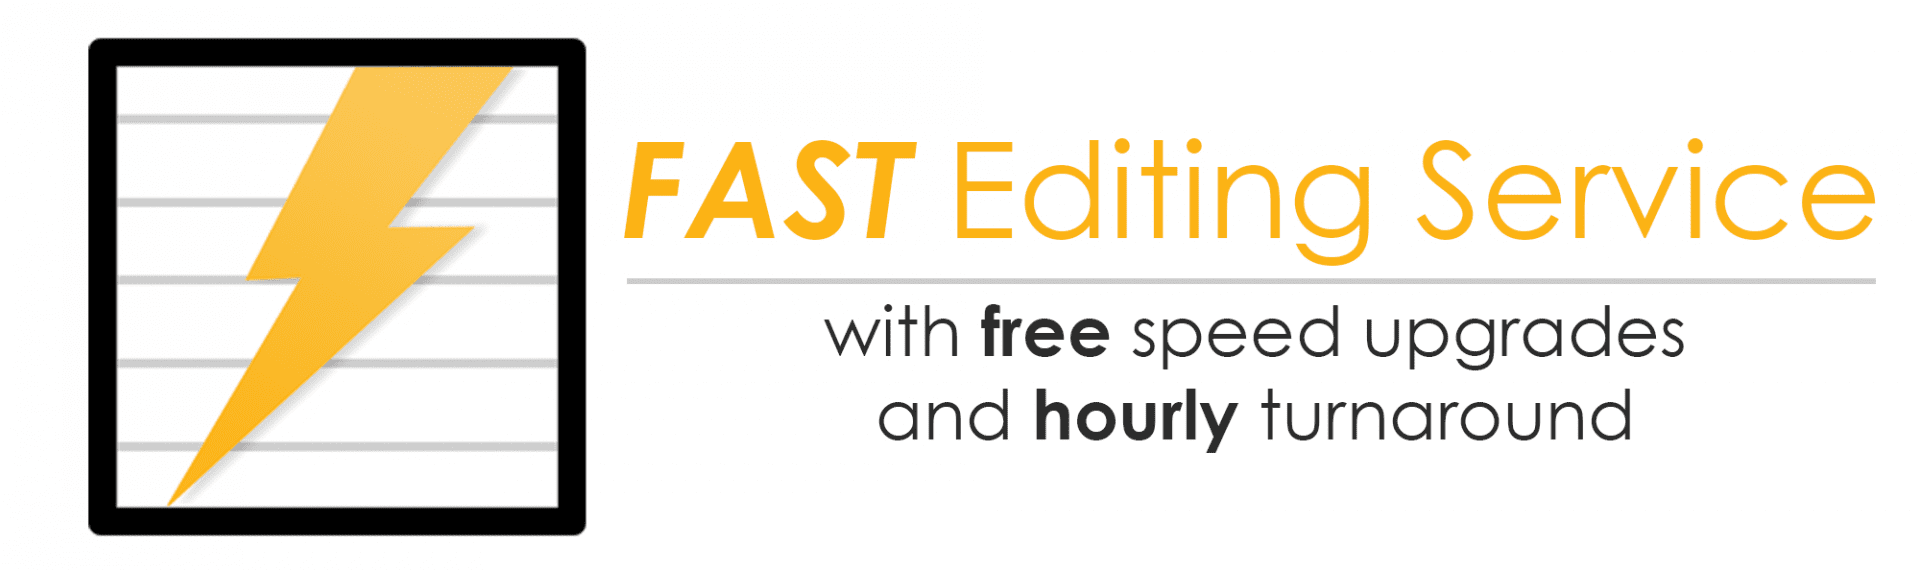 Fast Editing Service — 1-hour proofreading and editing. 24/7